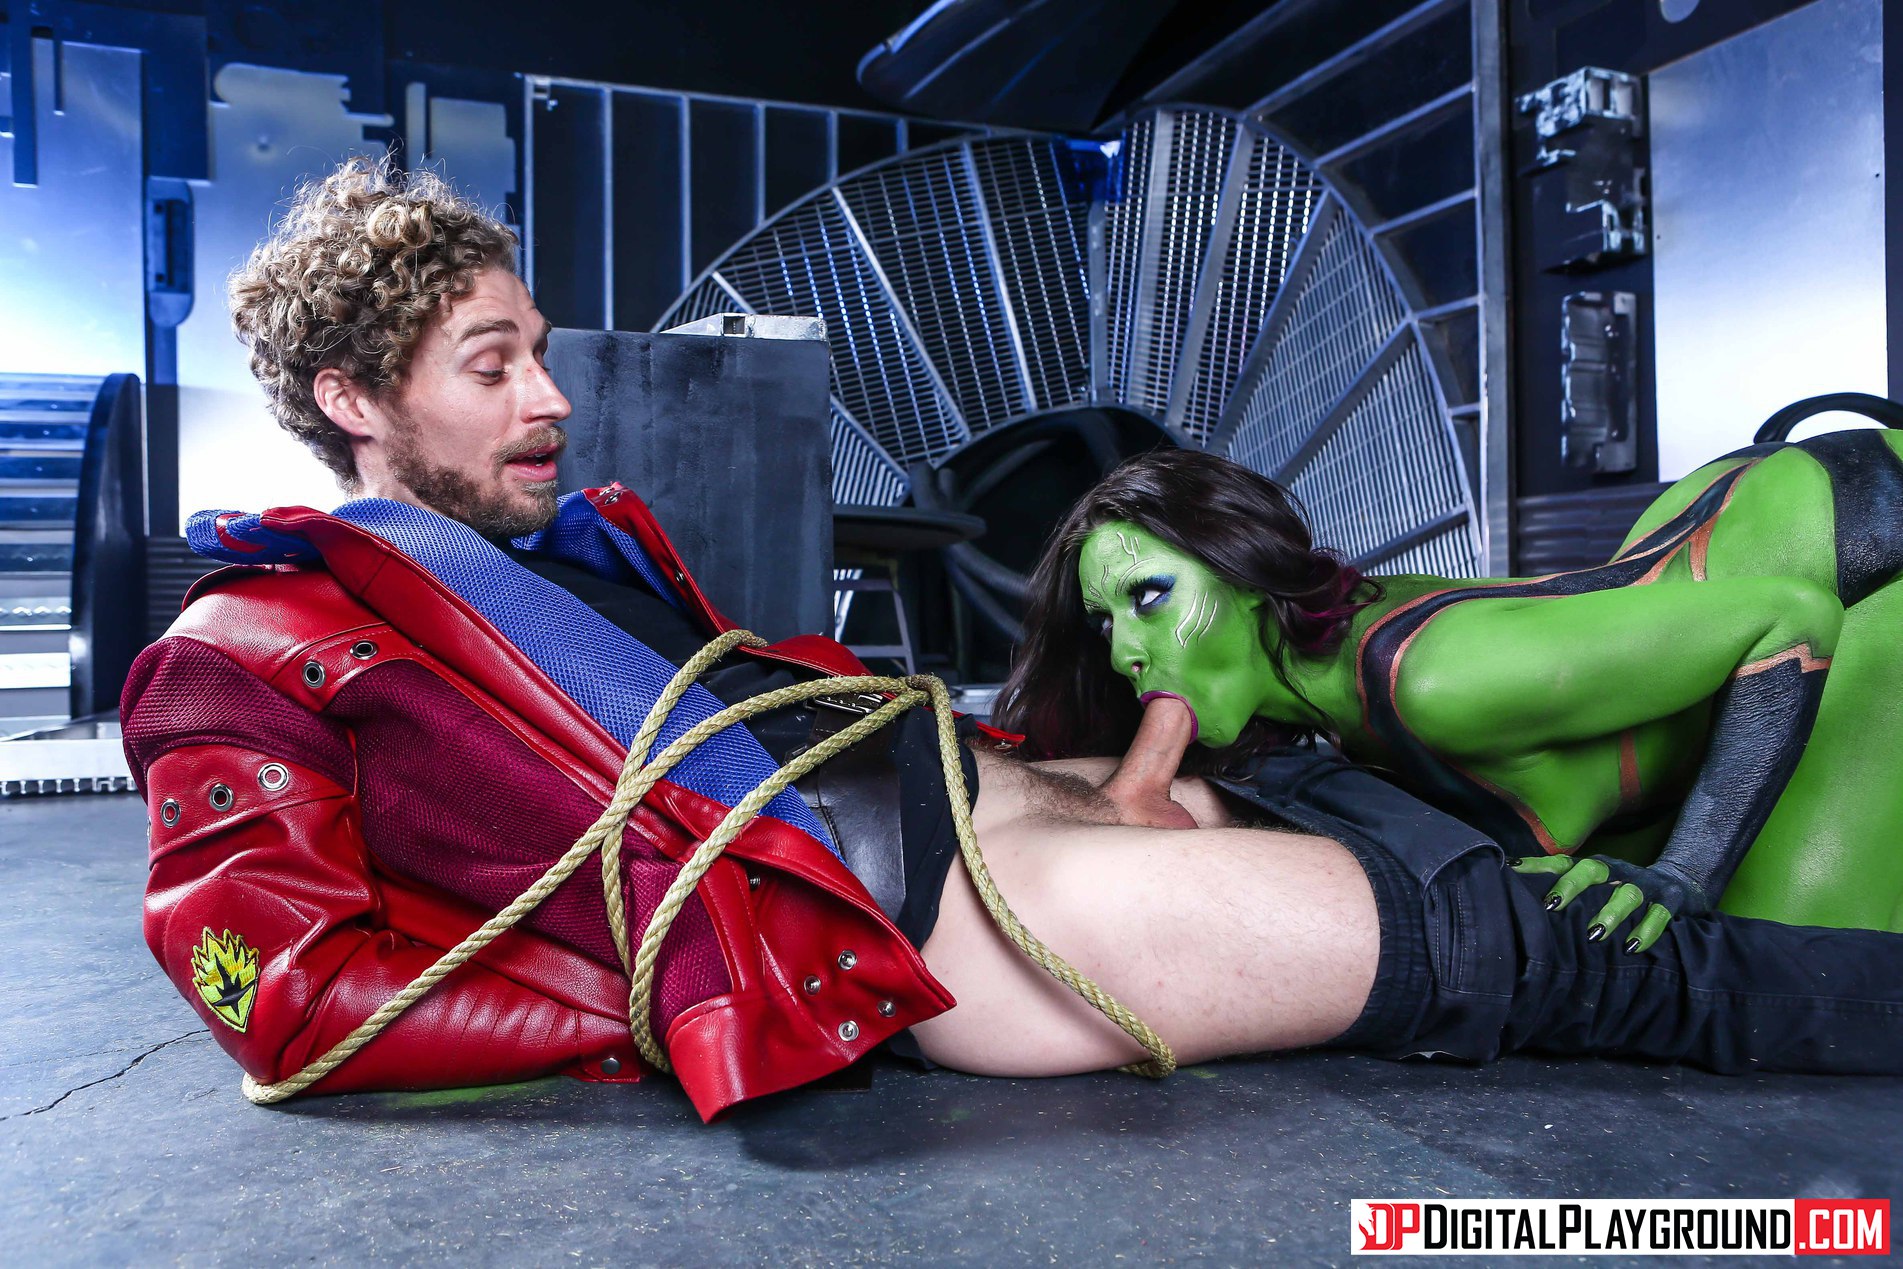 Porn Parody Of Guardians Of The Galaxy.